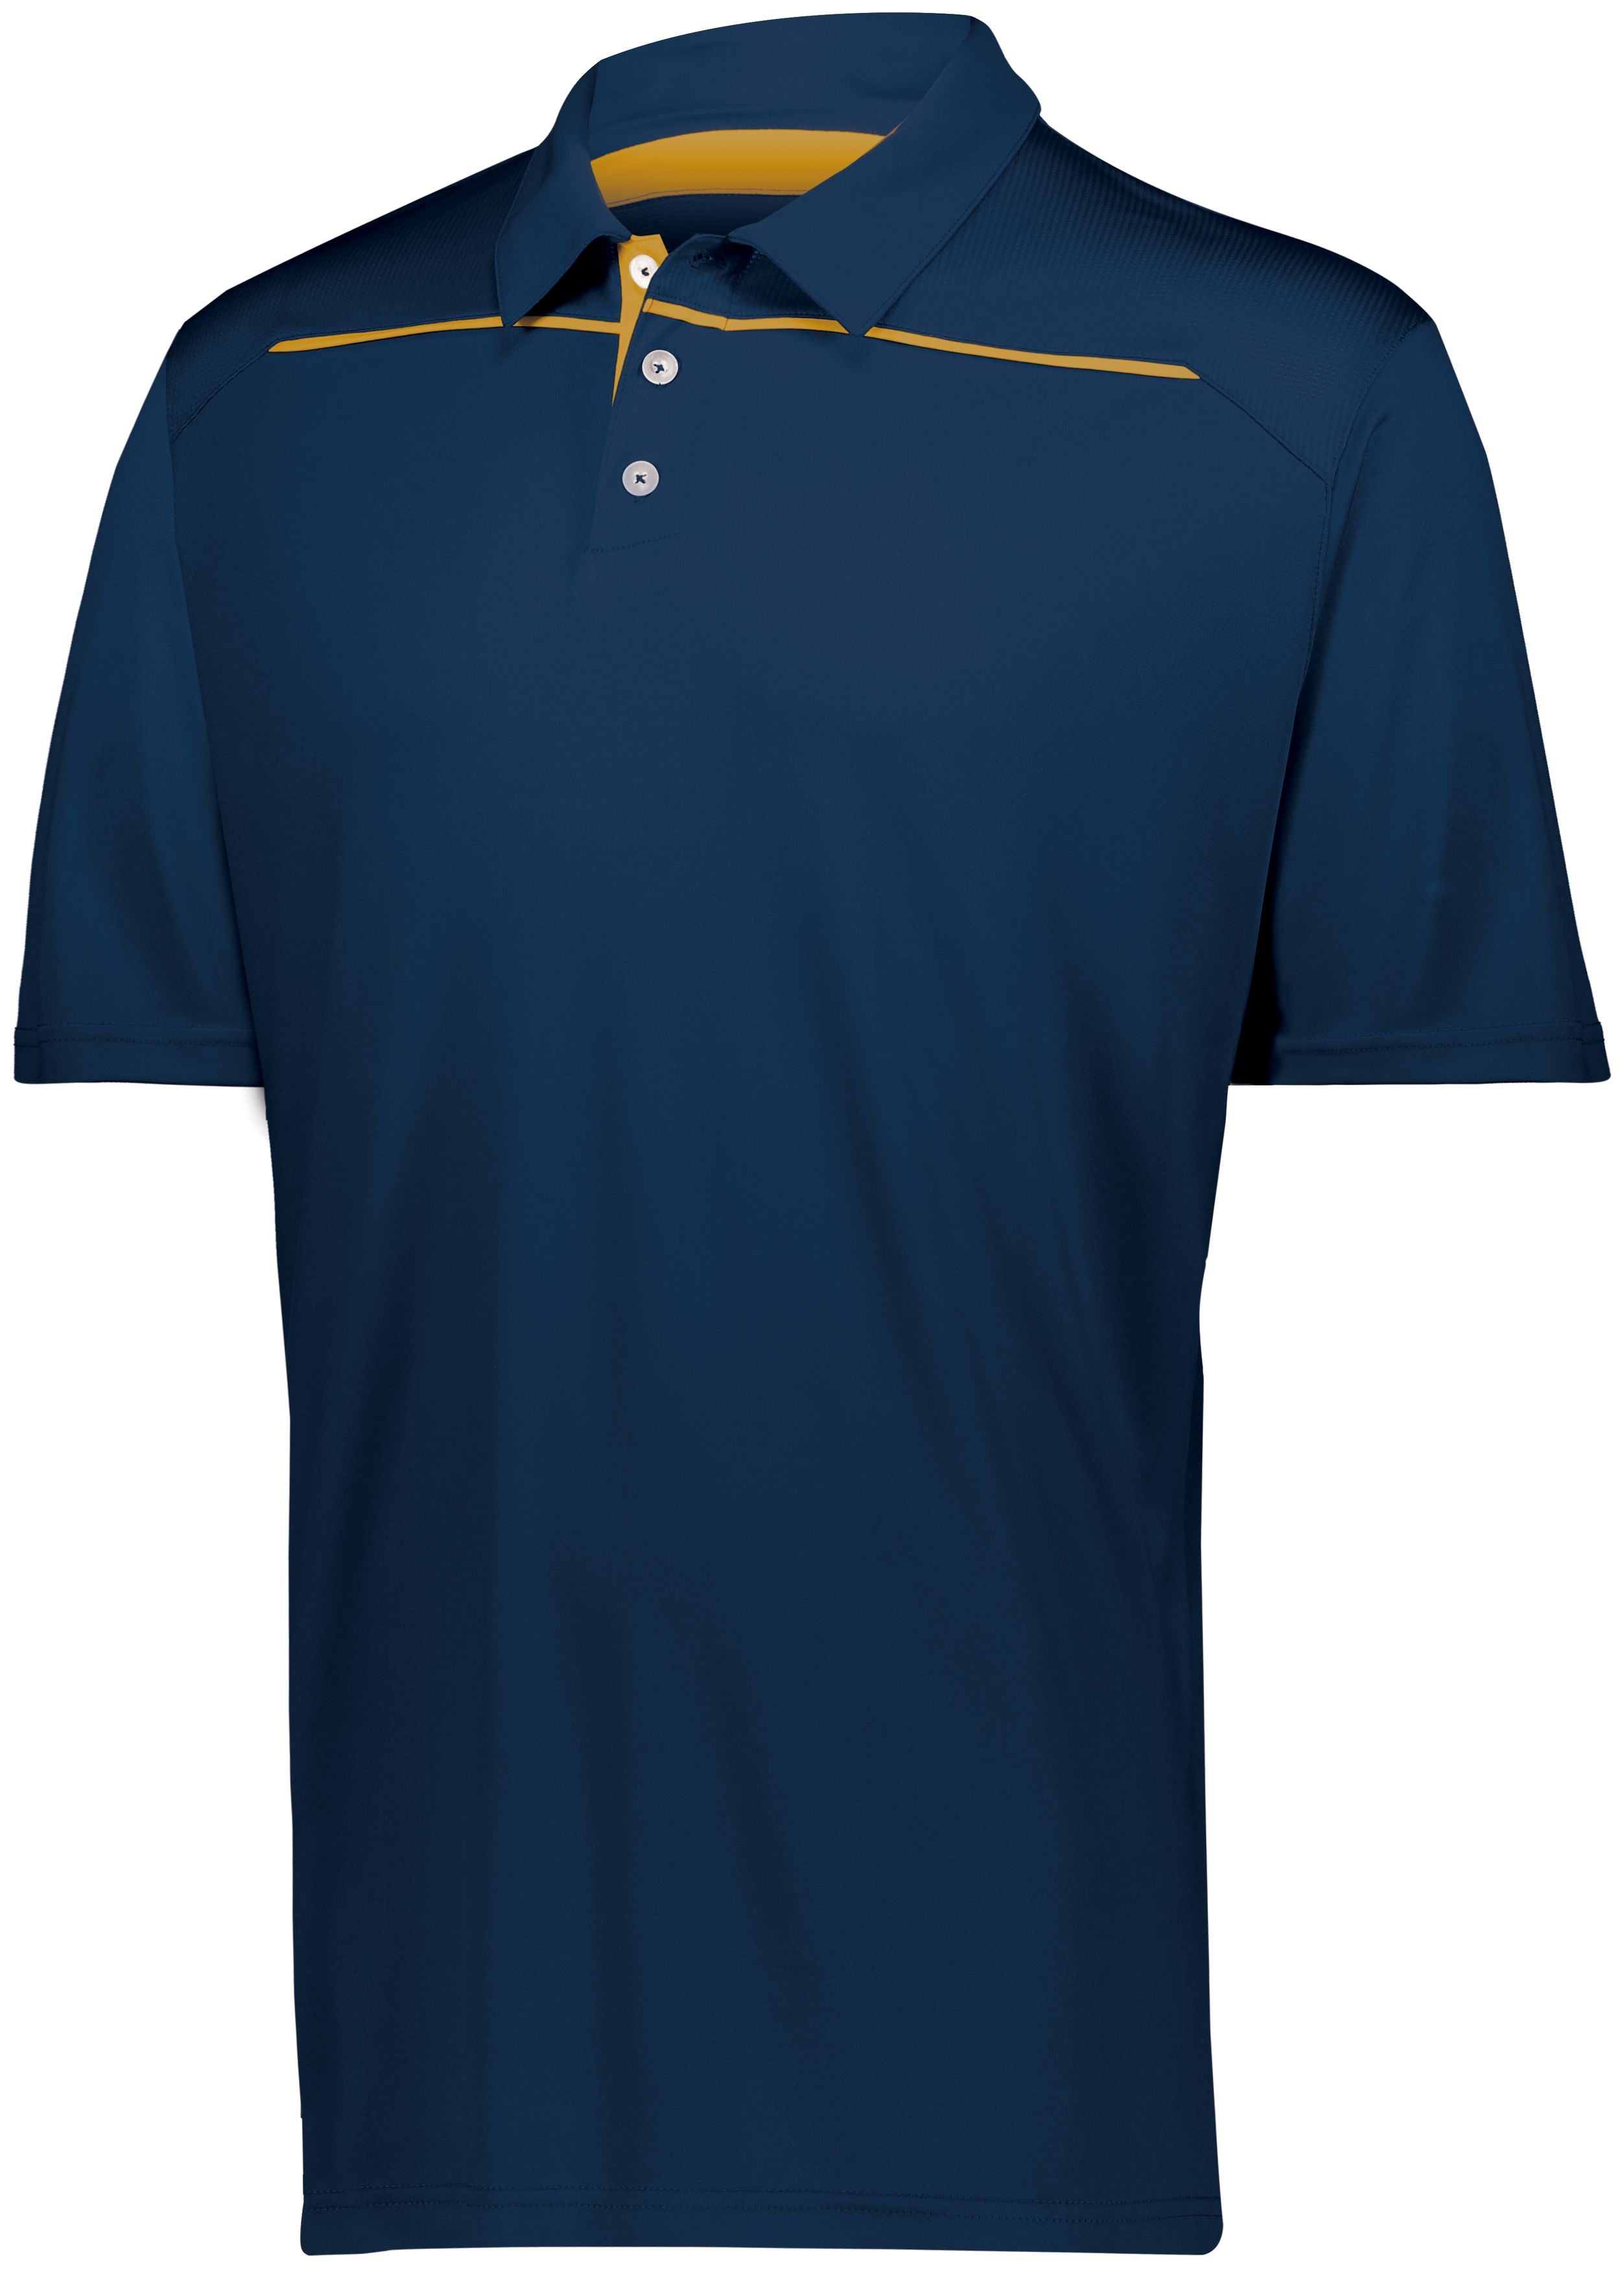 Holloway Defer Polo in Navy/Gold  -Part of the Adult, Adult-Polos, Polos, Holloway, Shirts product lines at KanaleyCreations.com